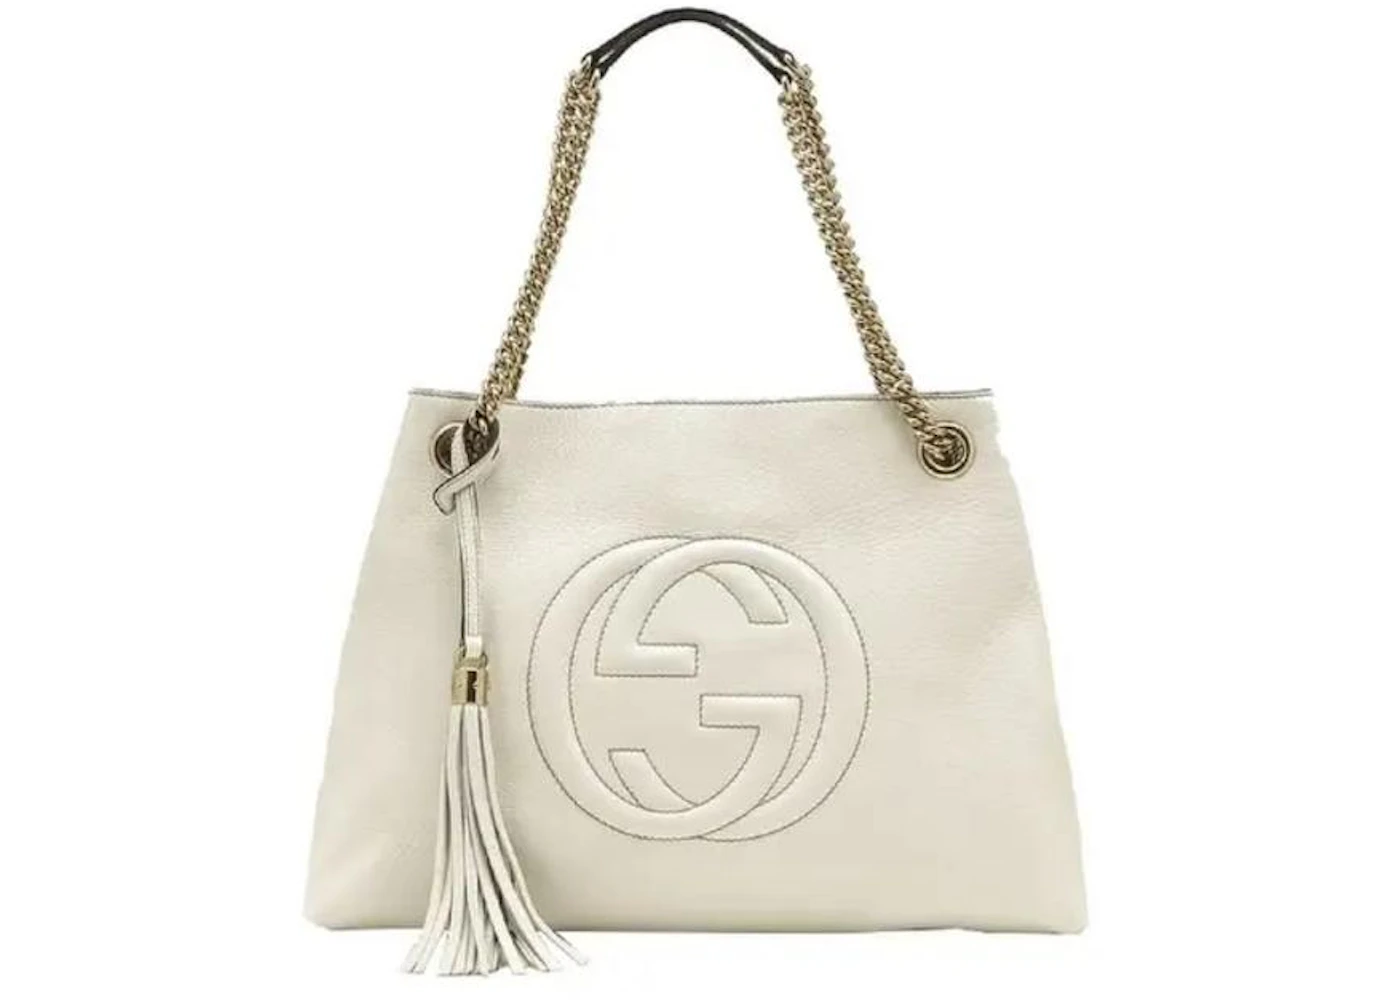 Gucci Soho Pebbled Chain Hobo Bag Medium White in Leather with Gold ...